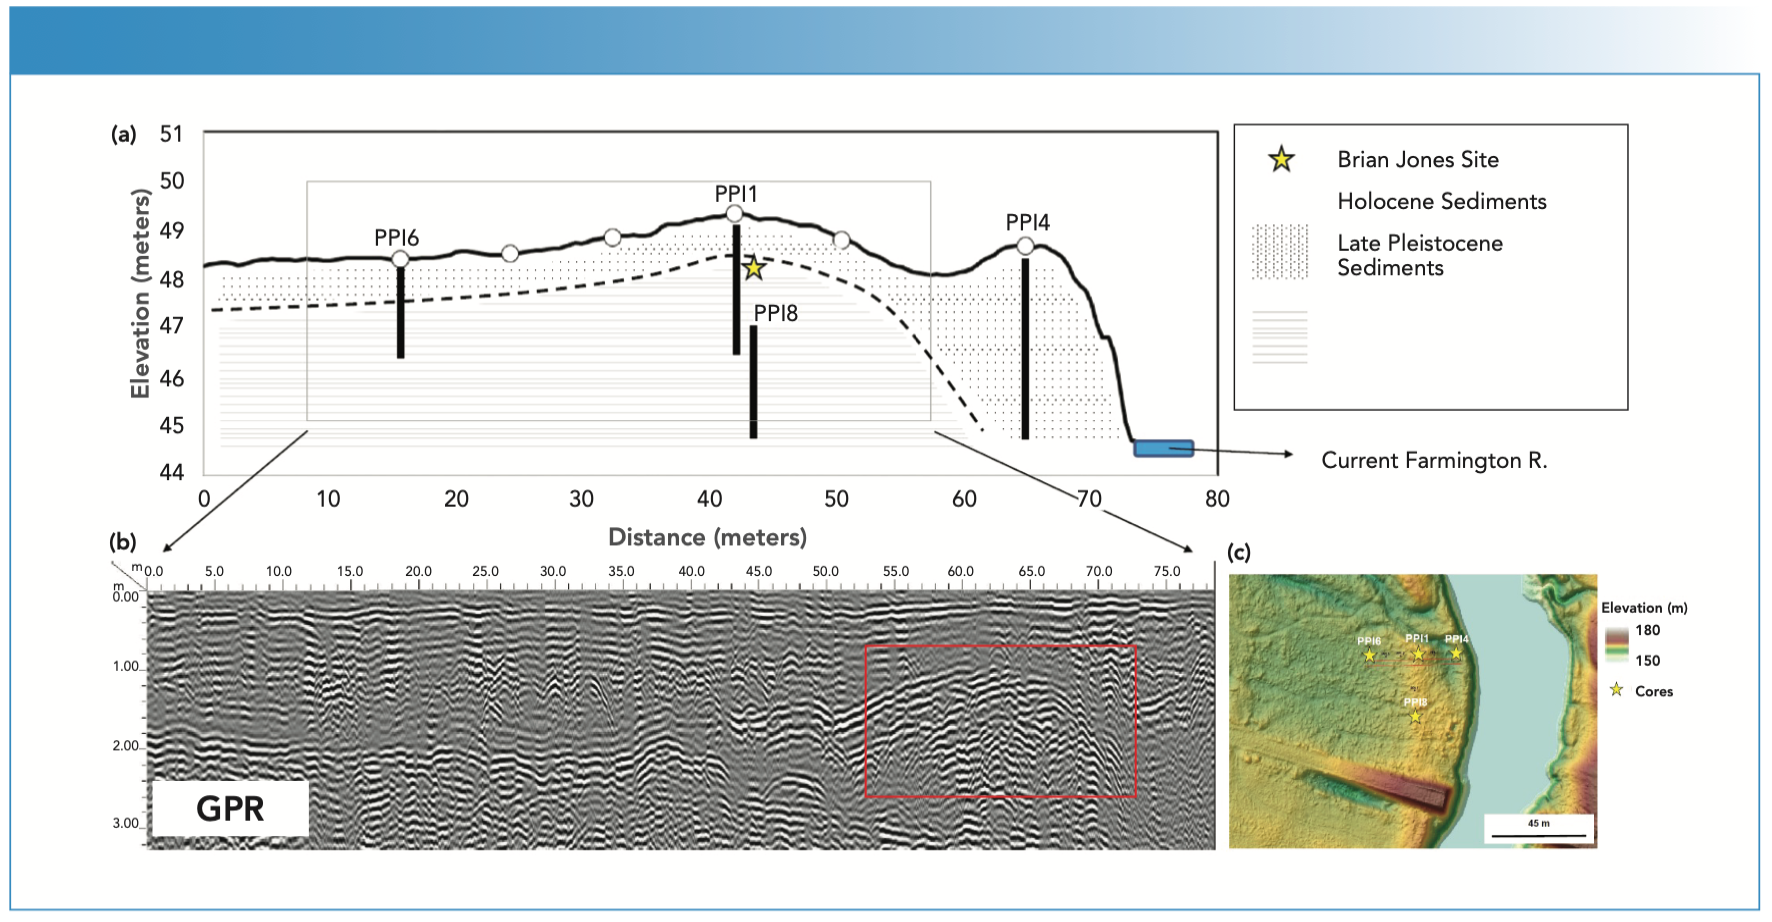 FIGURE 1: (a) Elevation profile of Brian D. Jones site (indicated by yellow star), with vibracoring locations indicated in black and labeled. (b) GPR inset displays complicated alluvial stratigraphy, as well as Pleistocene river terrace and archaeological site (red square). (c) LIDAR image displays modern elevation of landform, and, in yellow, the relict Pleistocene river terrace is visible, coinciding with PPI1 and PPI8 coring locations.